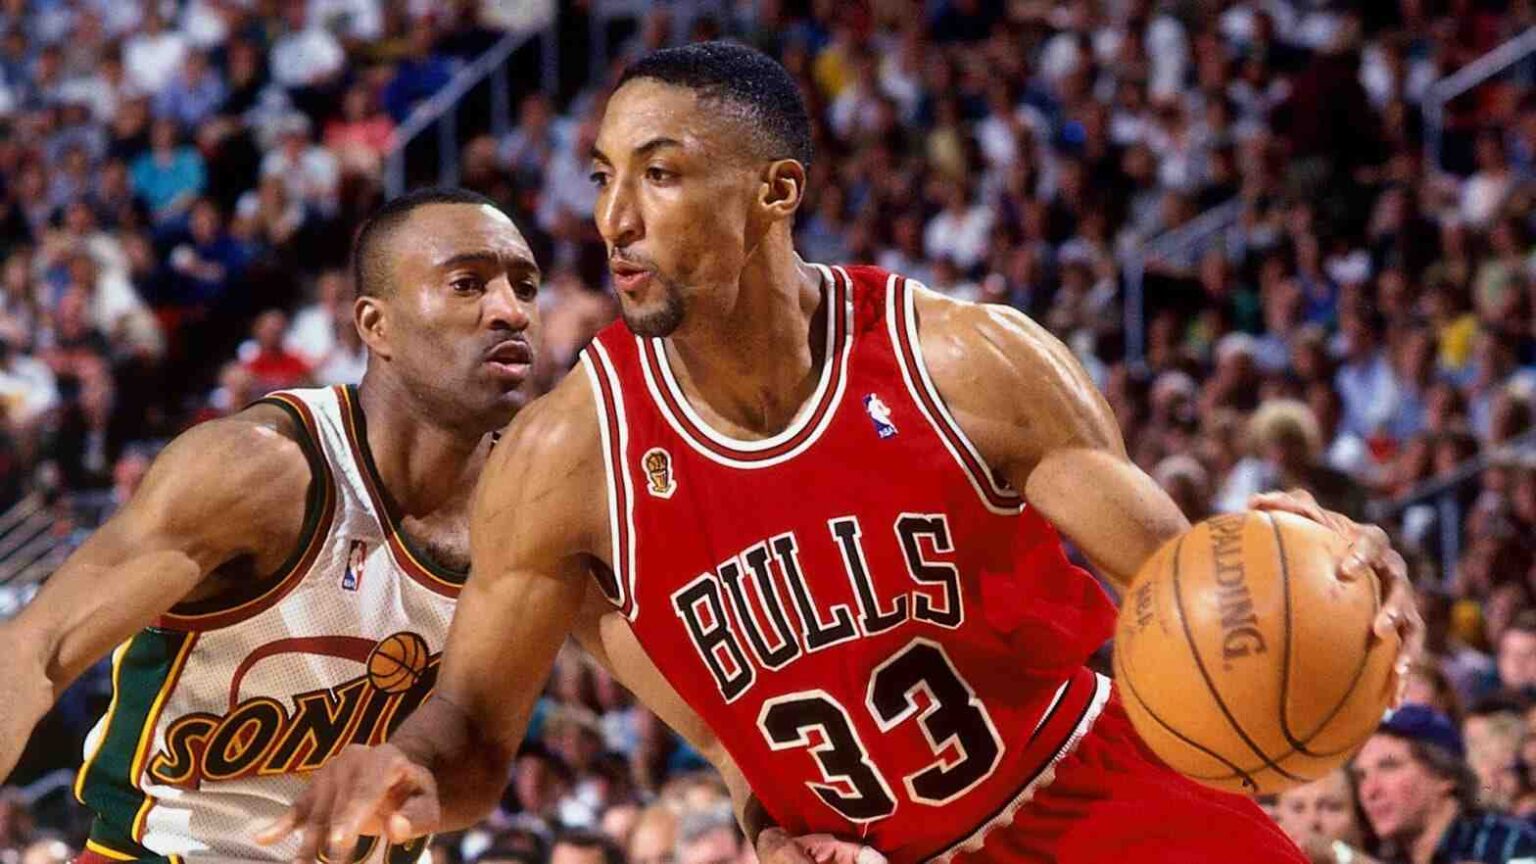 Gain the edge in the game of fortunes! Scottie Pippen stirs special secrets about Michael Jordan, cleverly challenging his net worth. Click and court the controversy!